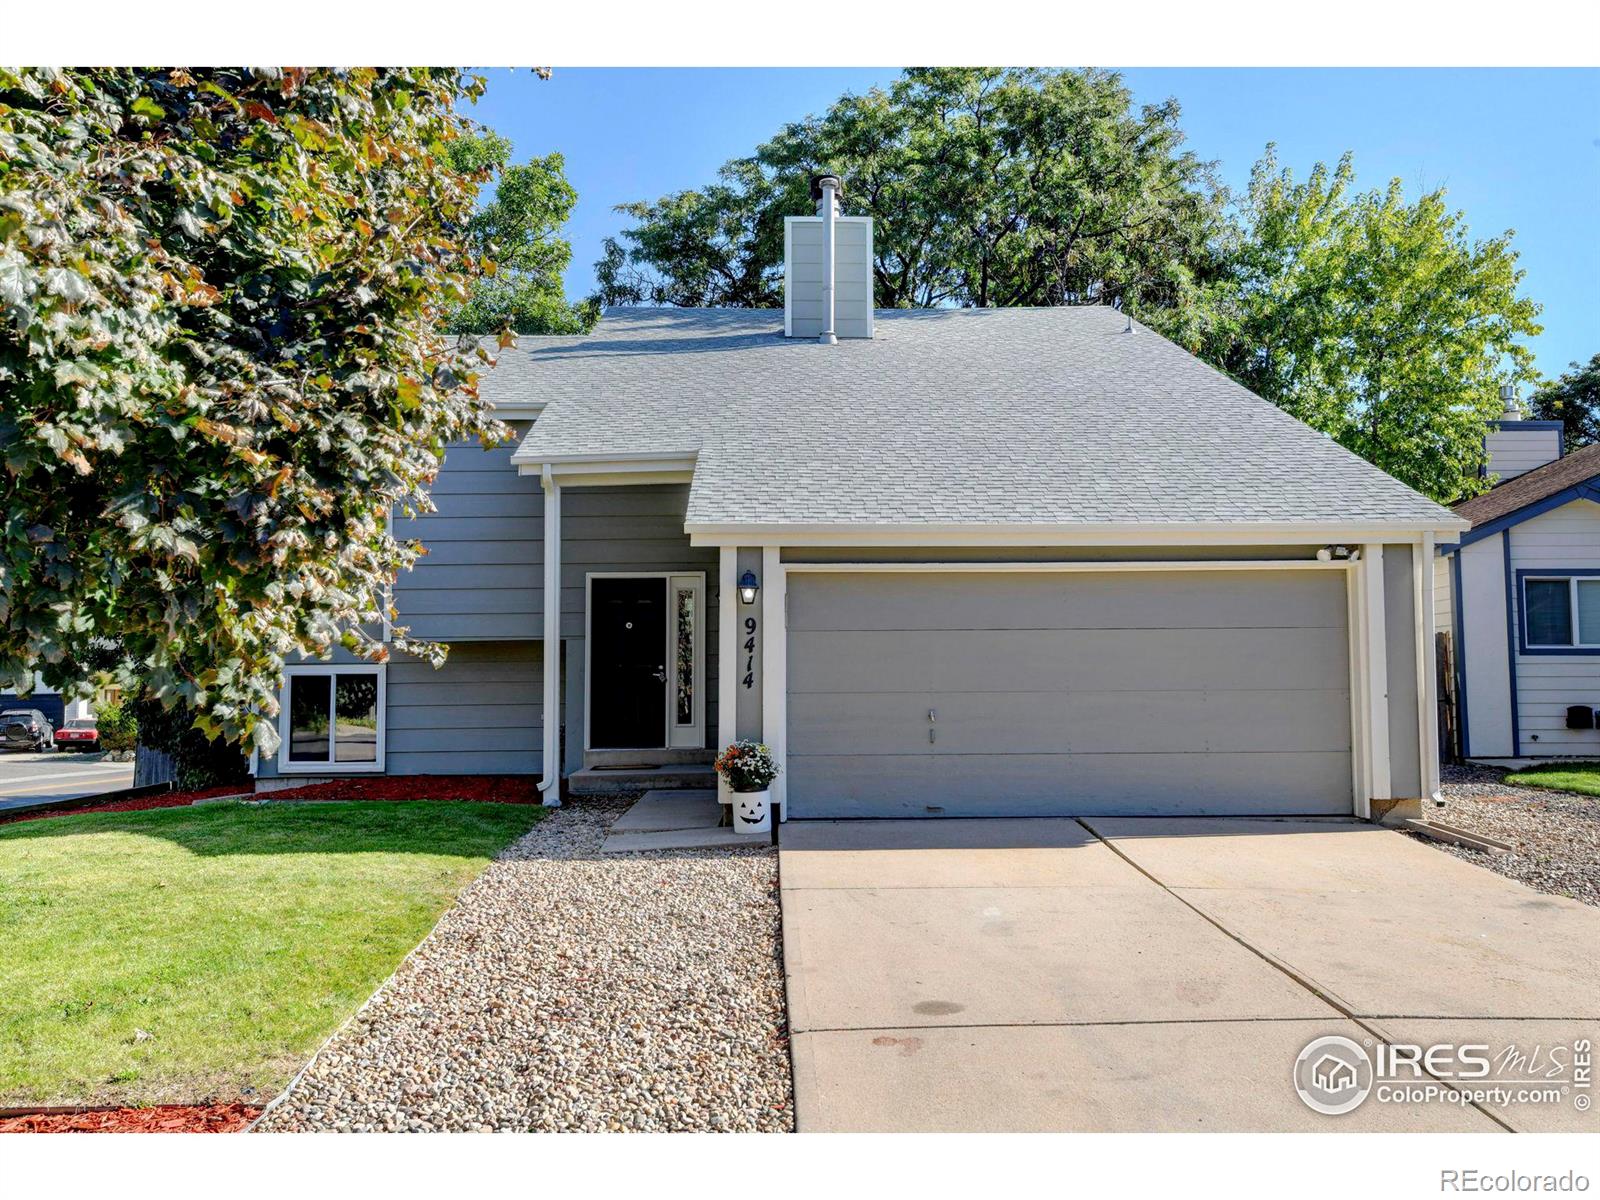 9414 w 99th place, Westminster sold home. Closed on 2024-01-02 for $576,000.